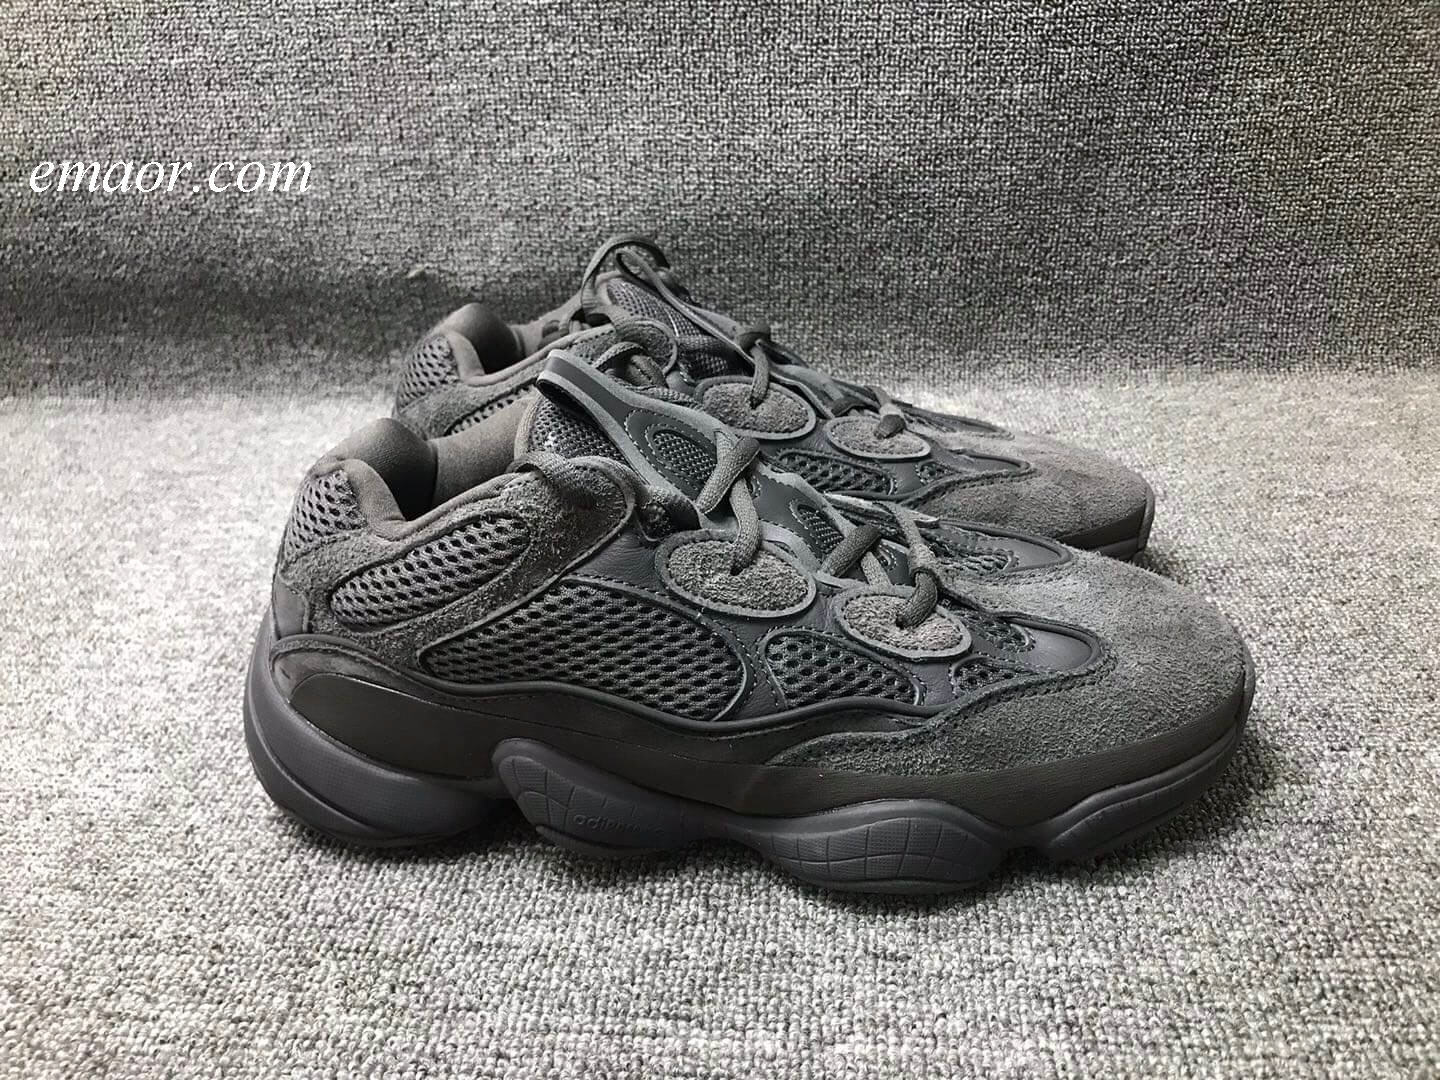 Yeezy 500 Salt New Releases Hiking Shoes Men's Mesh Summer Boost 350 Sneakers Roshing Runner Outdoors Sports Gym Boy Trainers Yeezy 500 Salt 